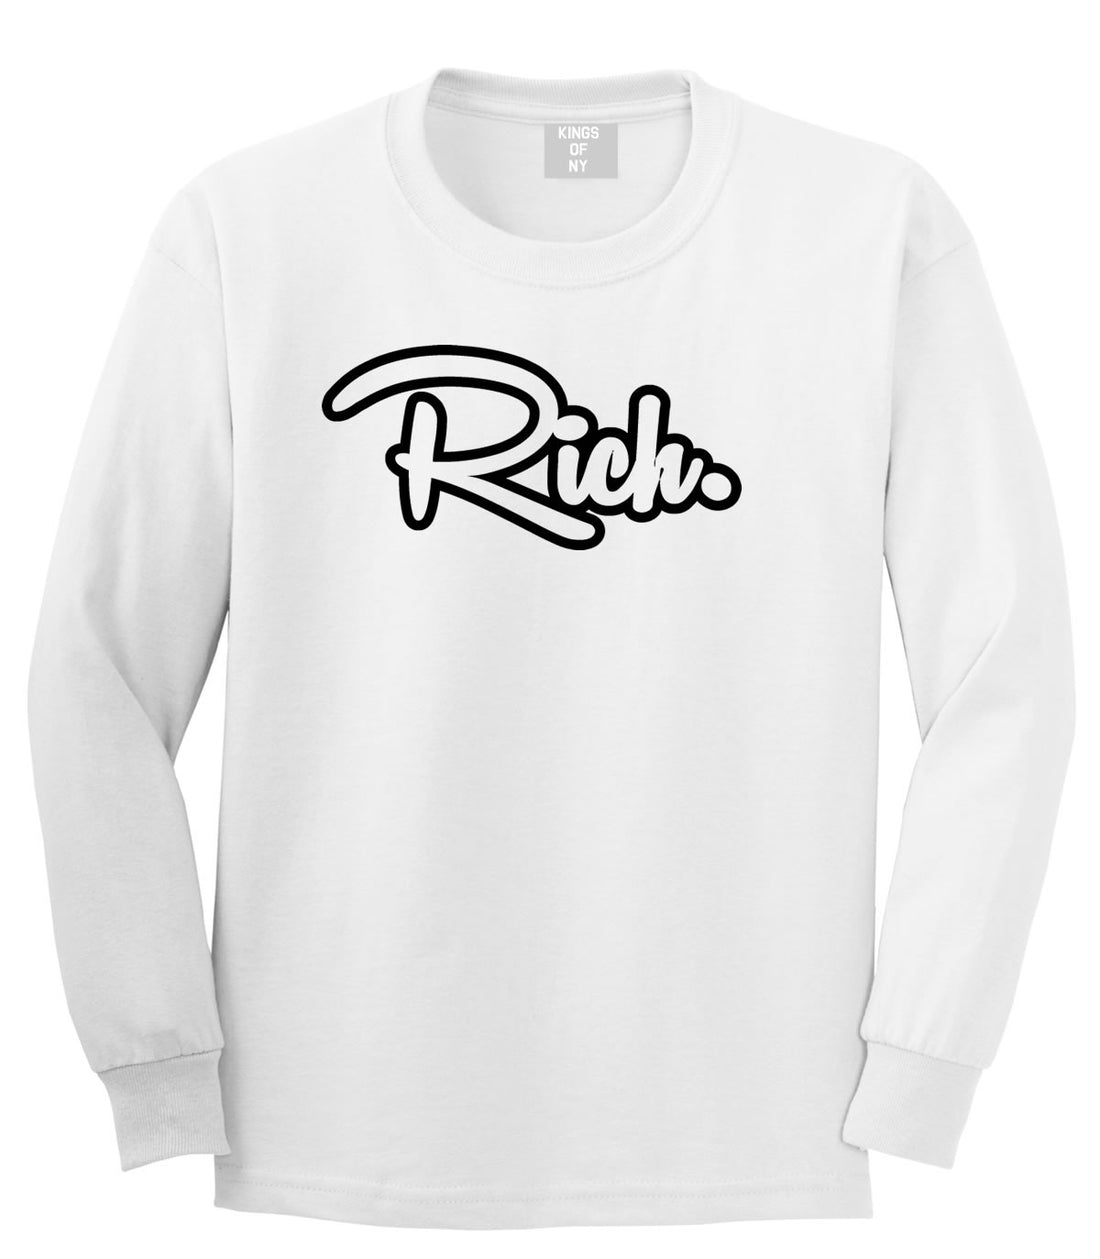 Rich Money Fab Style New York Richie NYC Long Sleeve T-Shirt in White by Kings Of NY